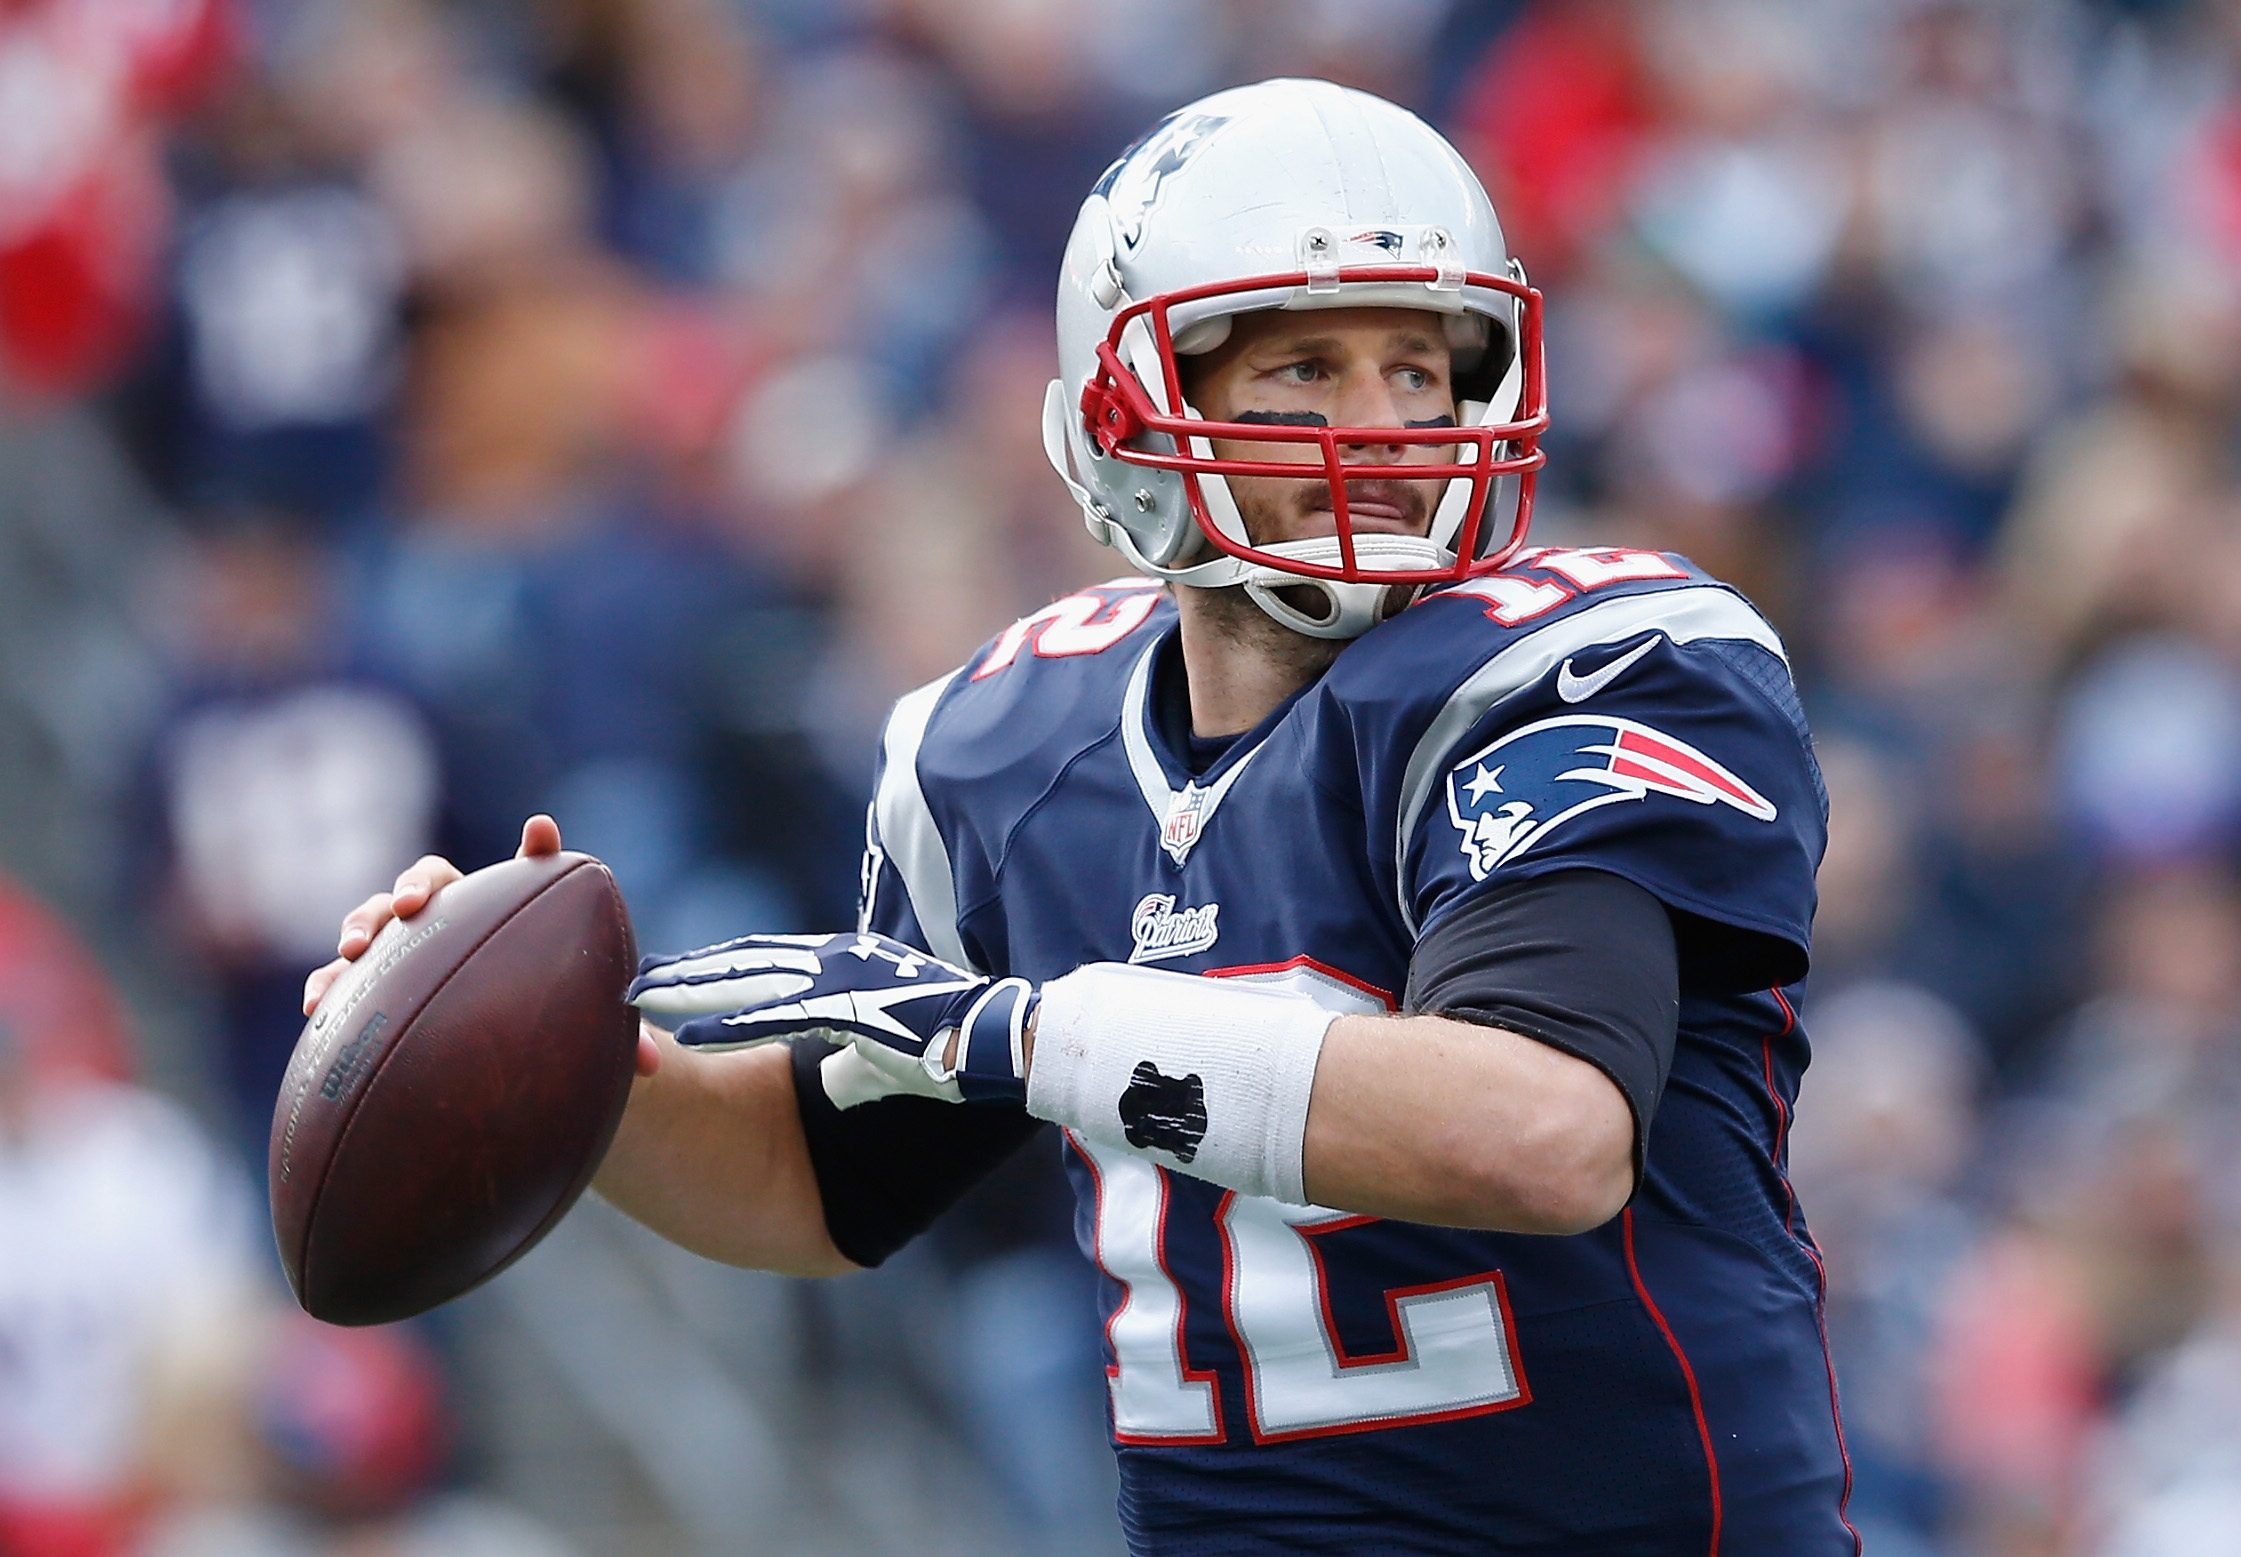 Tom Brady #12 of the New England Patriots passes the ball during the second quarter against the Chicago Bears at Gillette Stadium on October 26, 2014 in Foxboro, Massachusetts. (Jim Rogash&mdash;Getty Images)